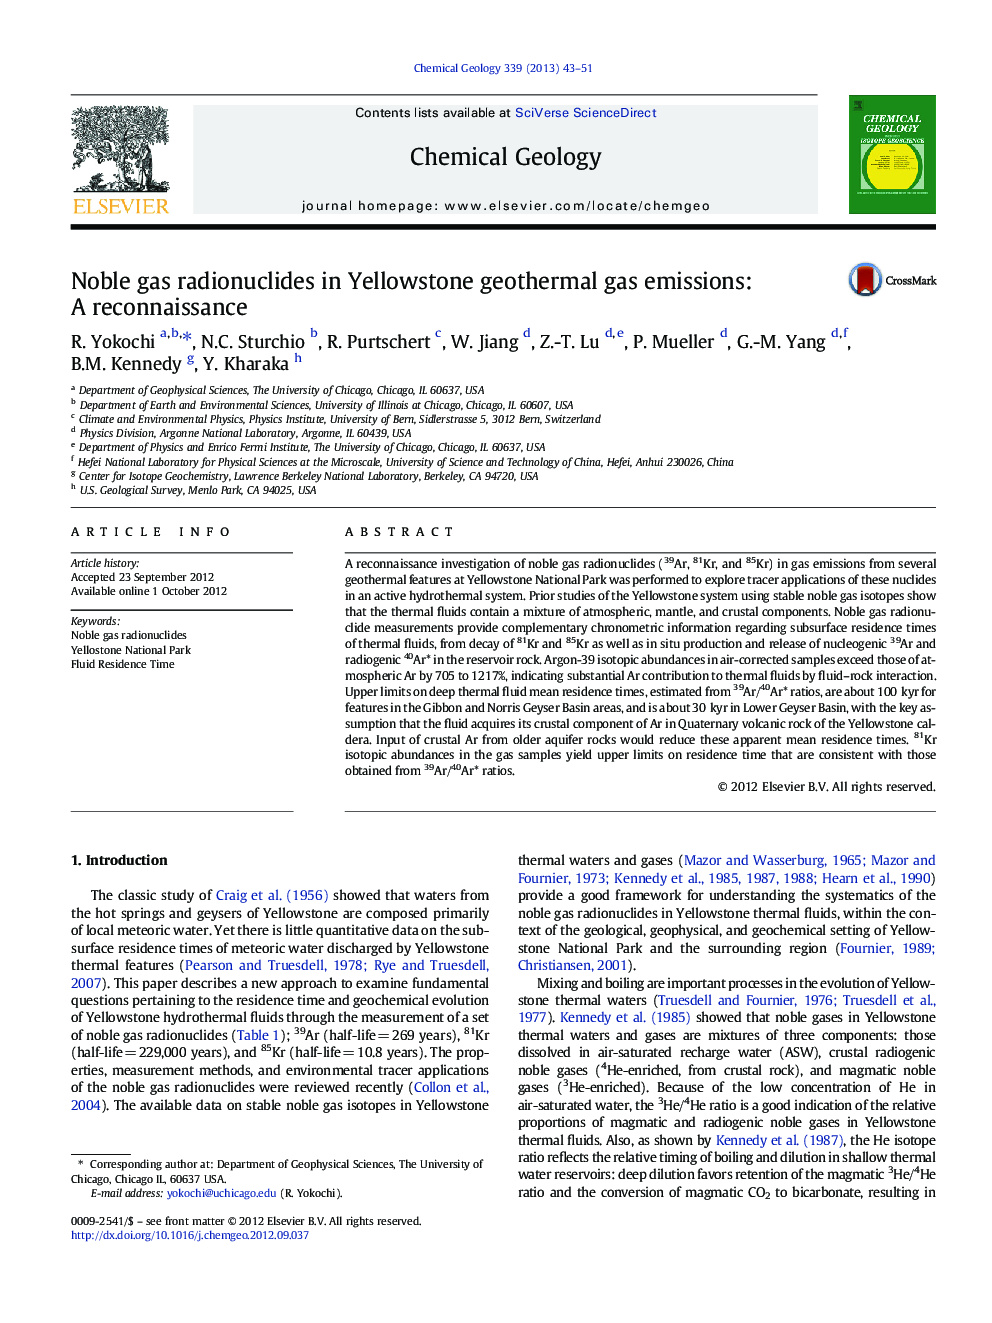 Noble gas radionuclides in Yellowstone geothermal gas emissions: A reconnaissance